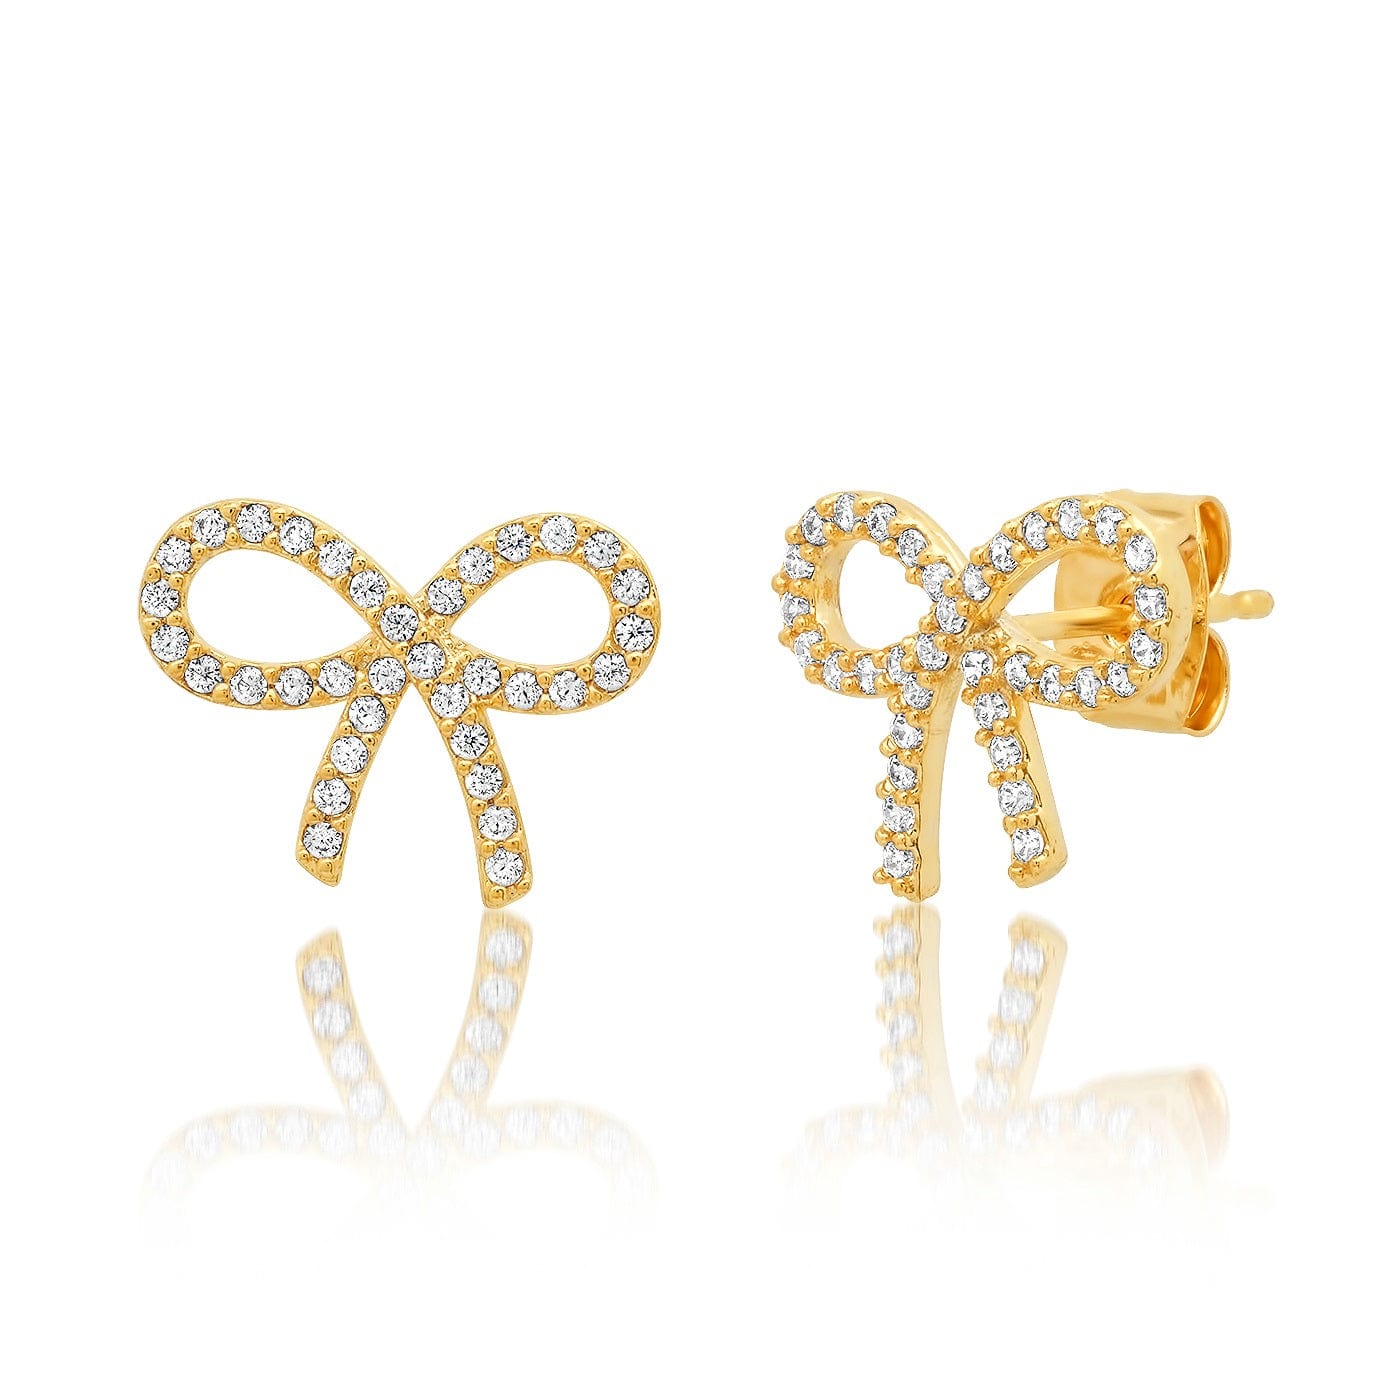 TAI JEWELRY Earrings Pave Cz Bows